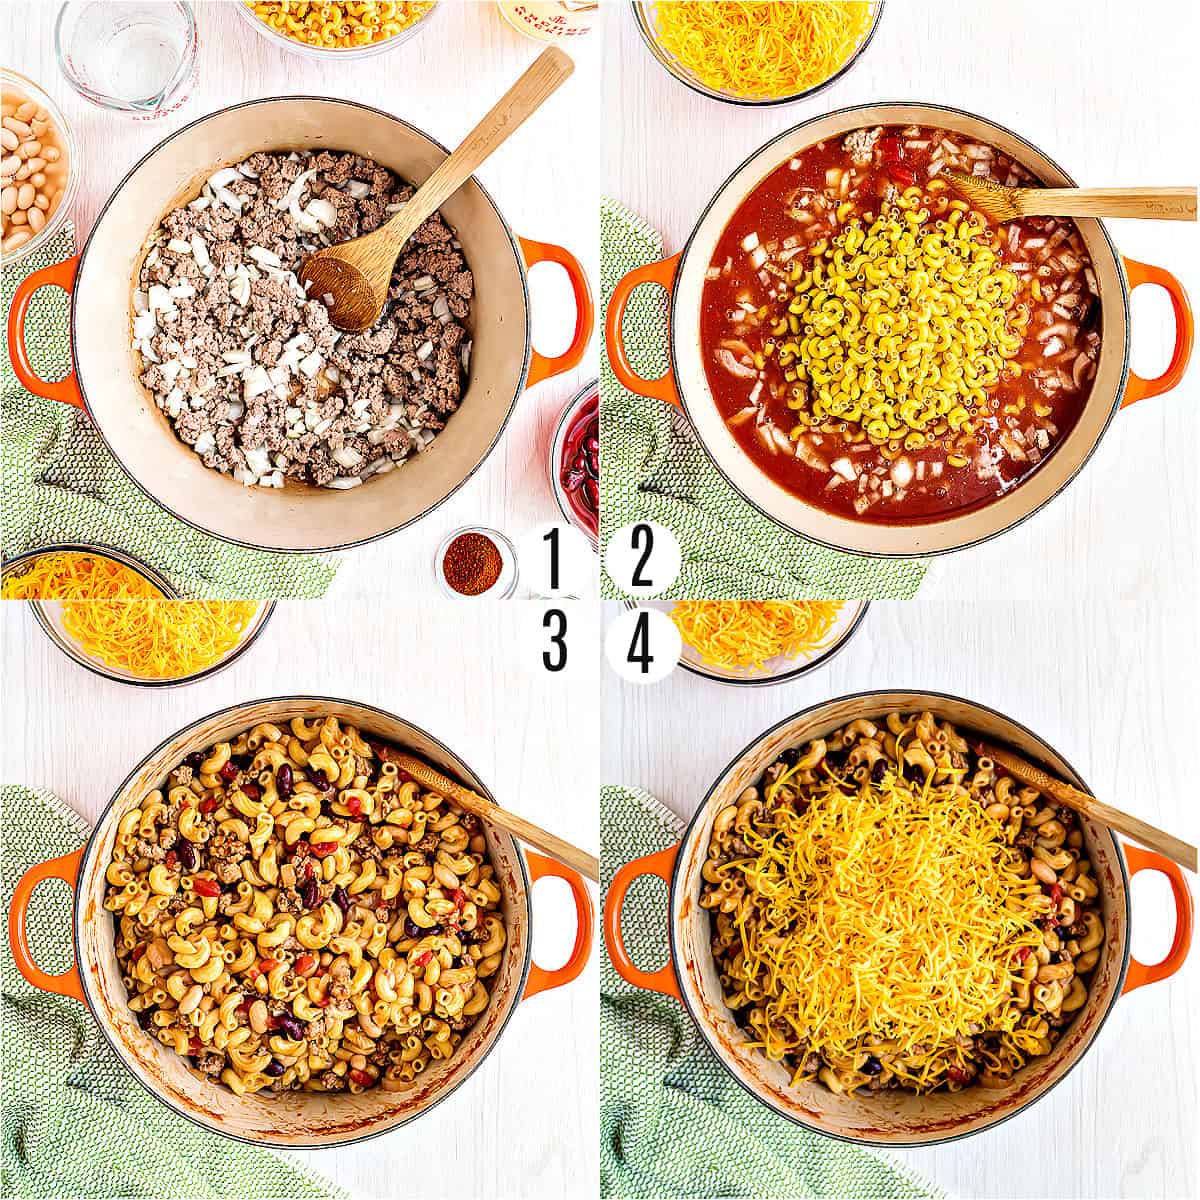 Step by step photos showing how to make one pot chili mac.